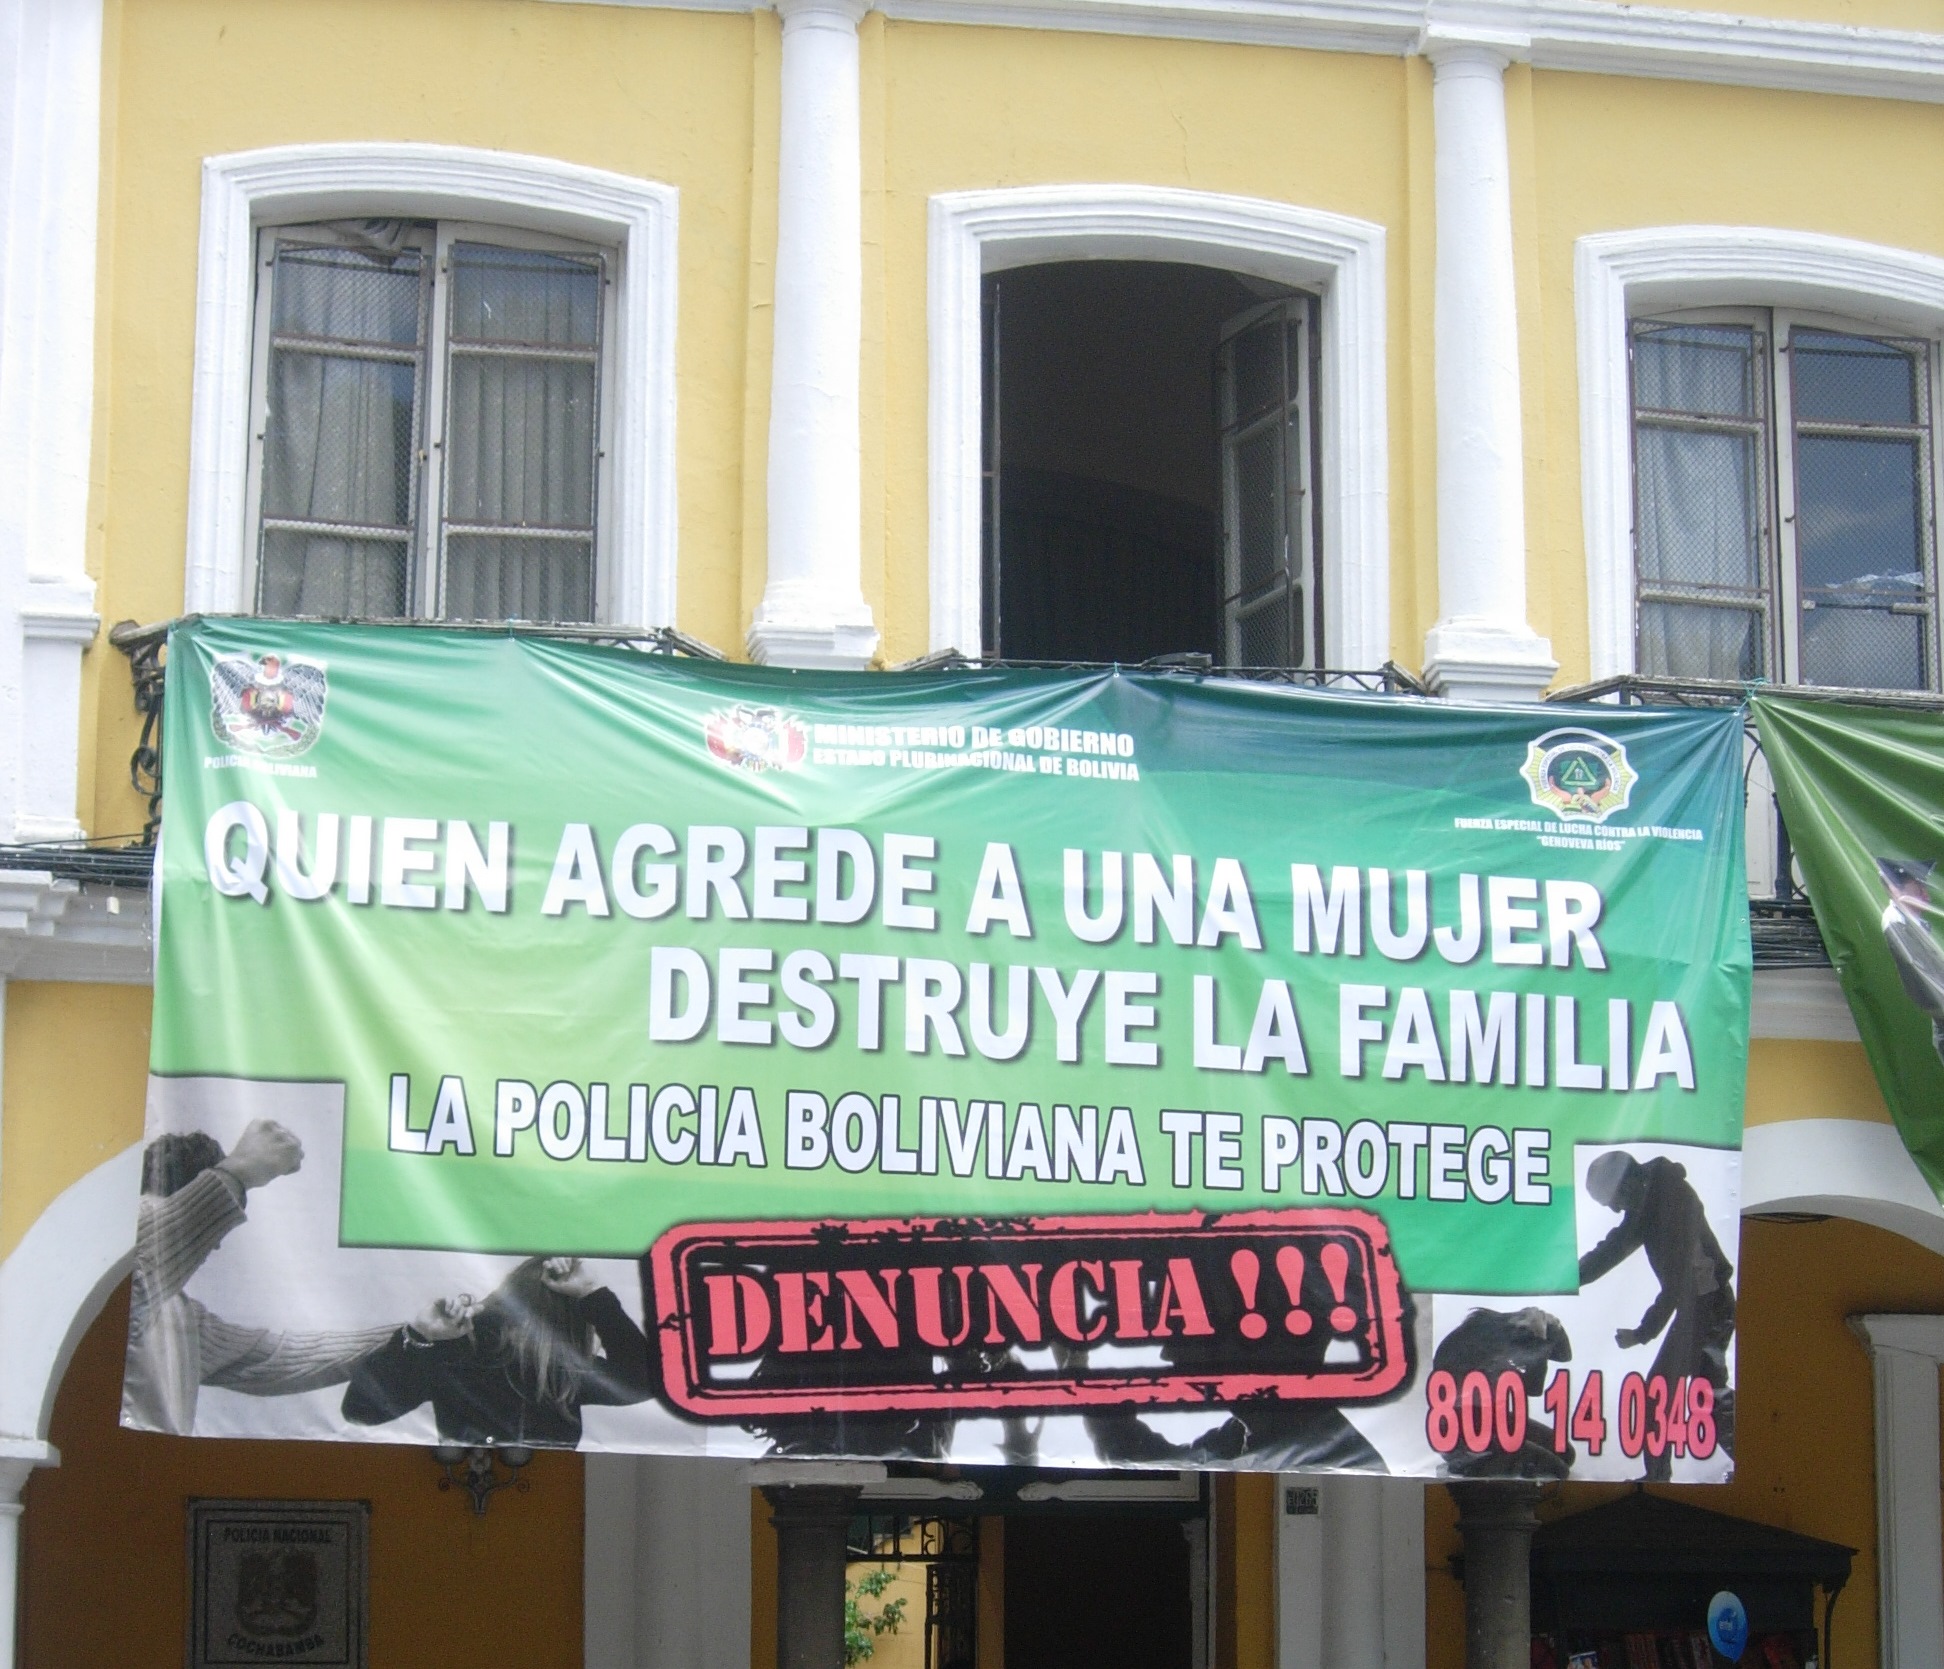 Awareness raising: "Who attacks a woman, destroys a family - Bolivia's police protects you"